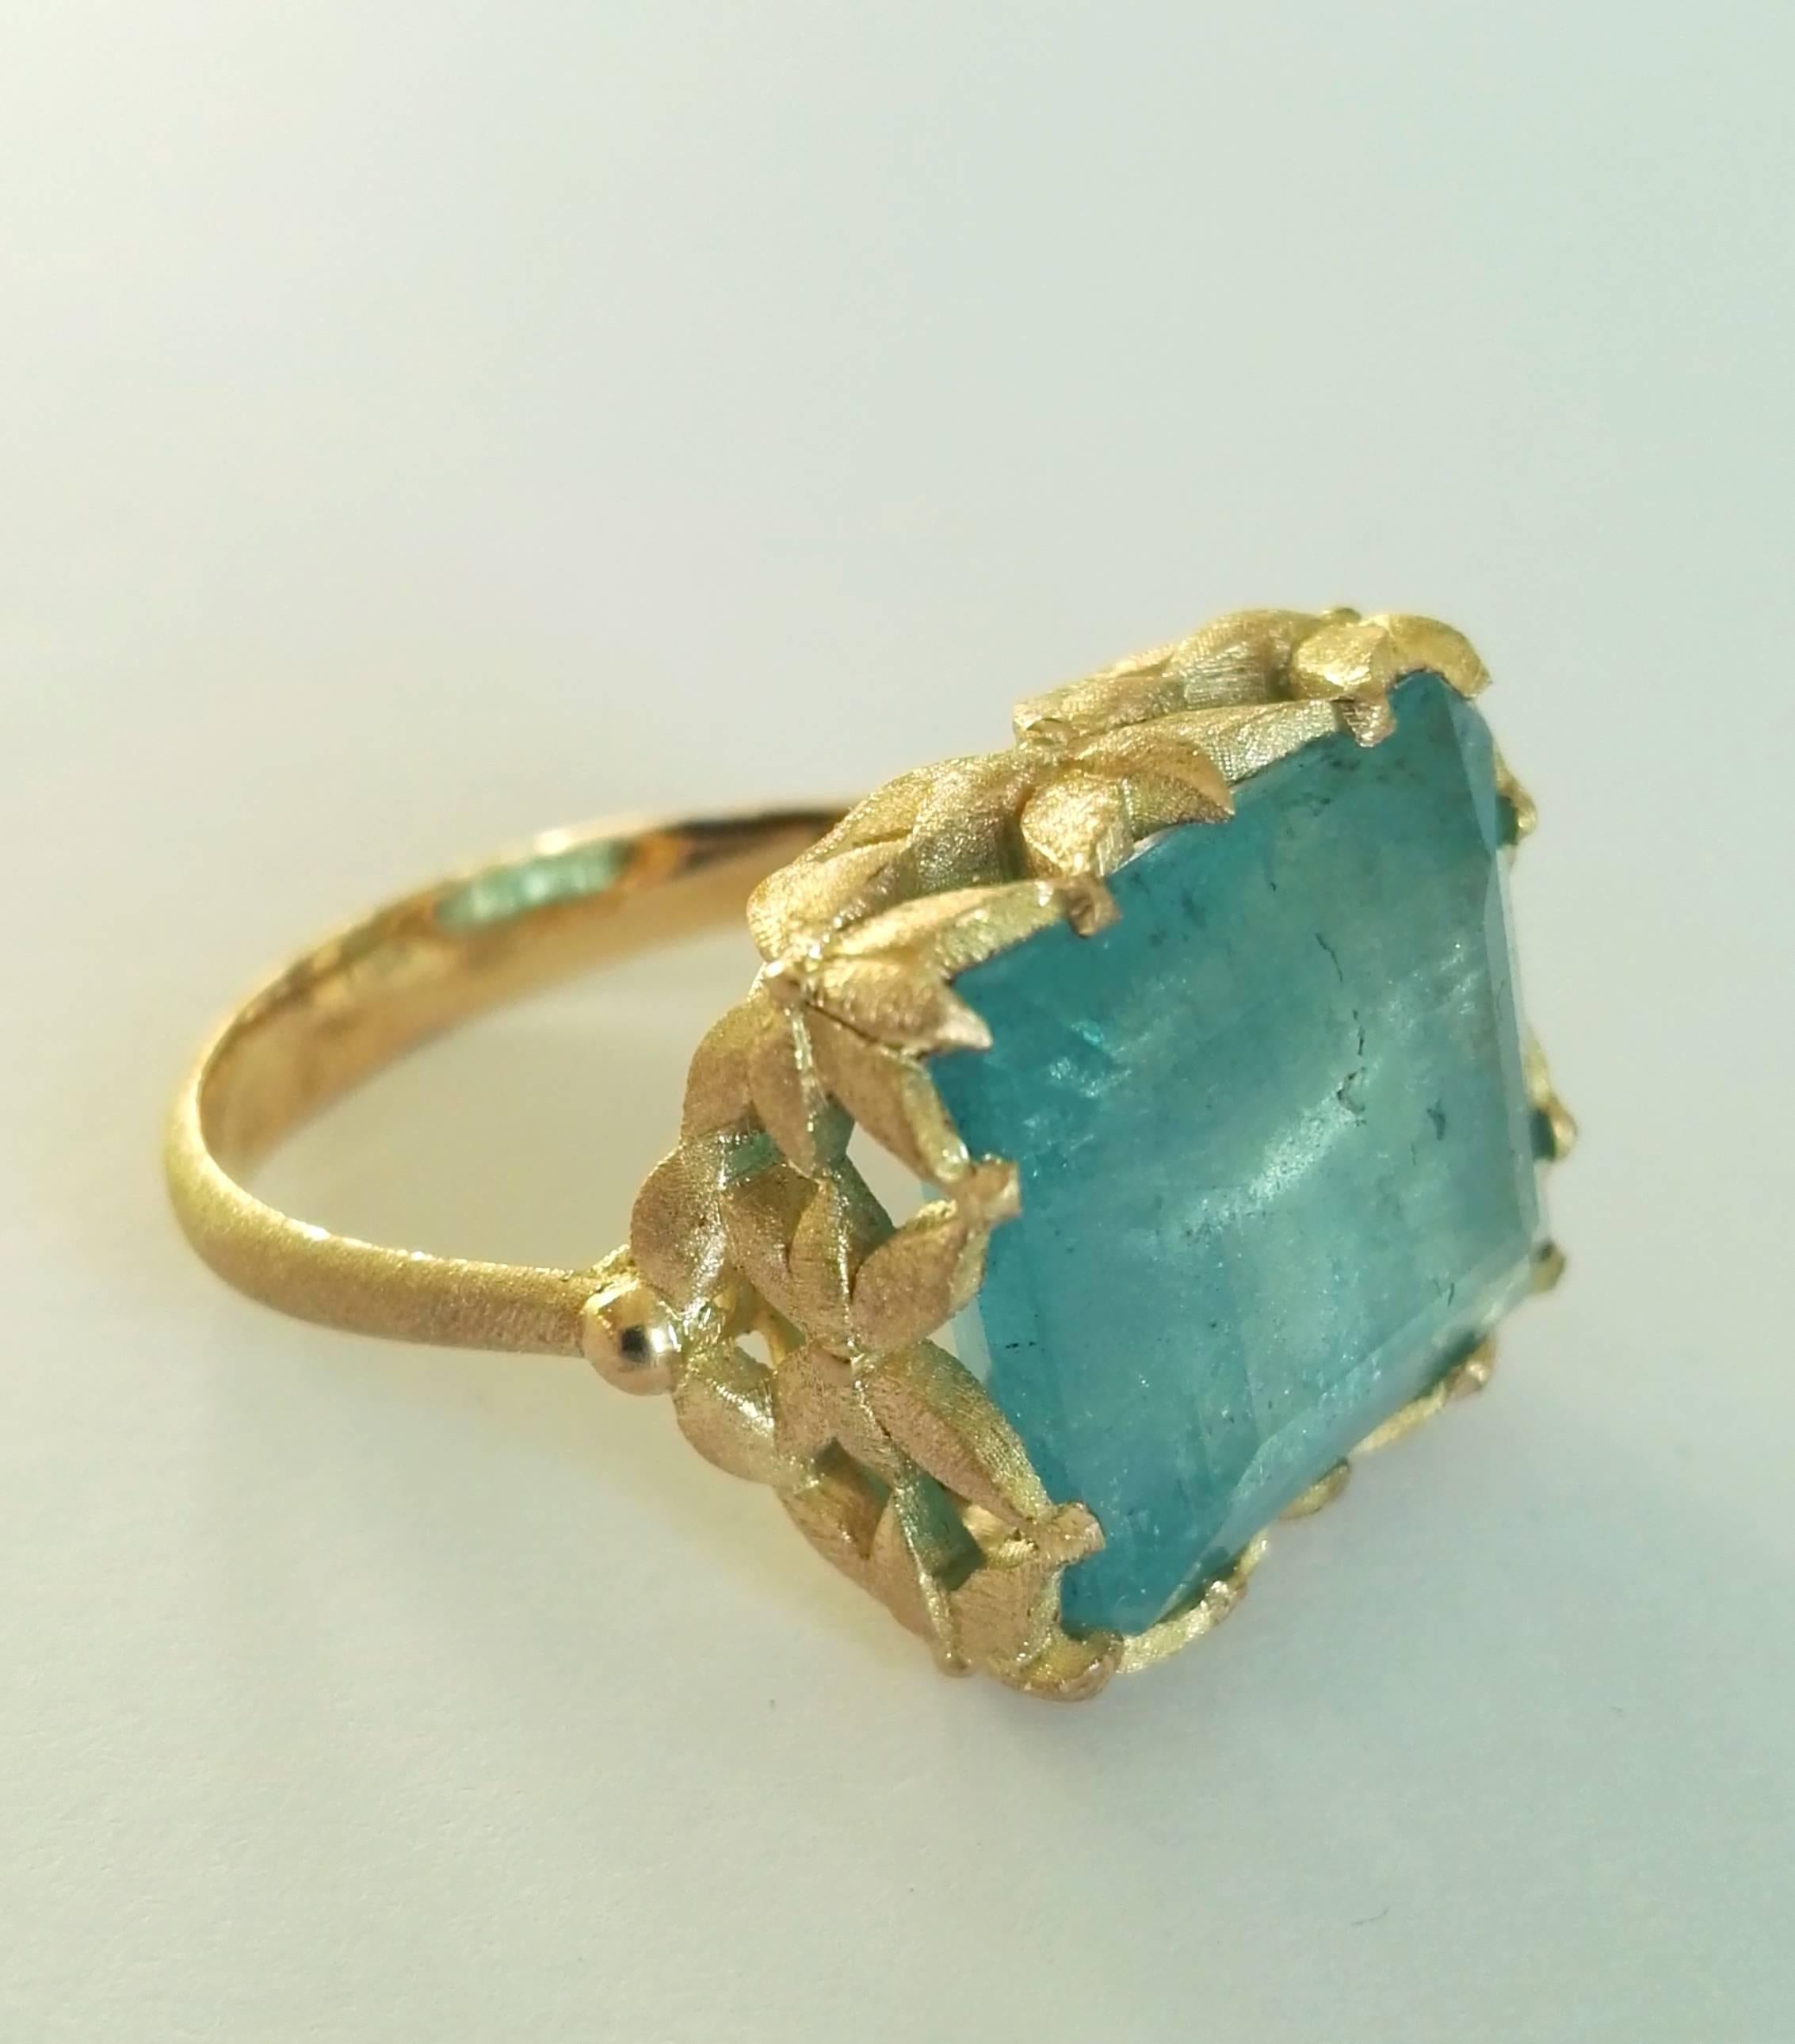 Dalben design 18 kt engraved yellow gold Cocktail Ring with an Emerald cut Aquamarine weighting 8,40 carat .  
Ring size 7  USA - 54 EU resizable to most finger sizes.  
The Ring has been designed and handcrafted in our atelier in Italy Como with